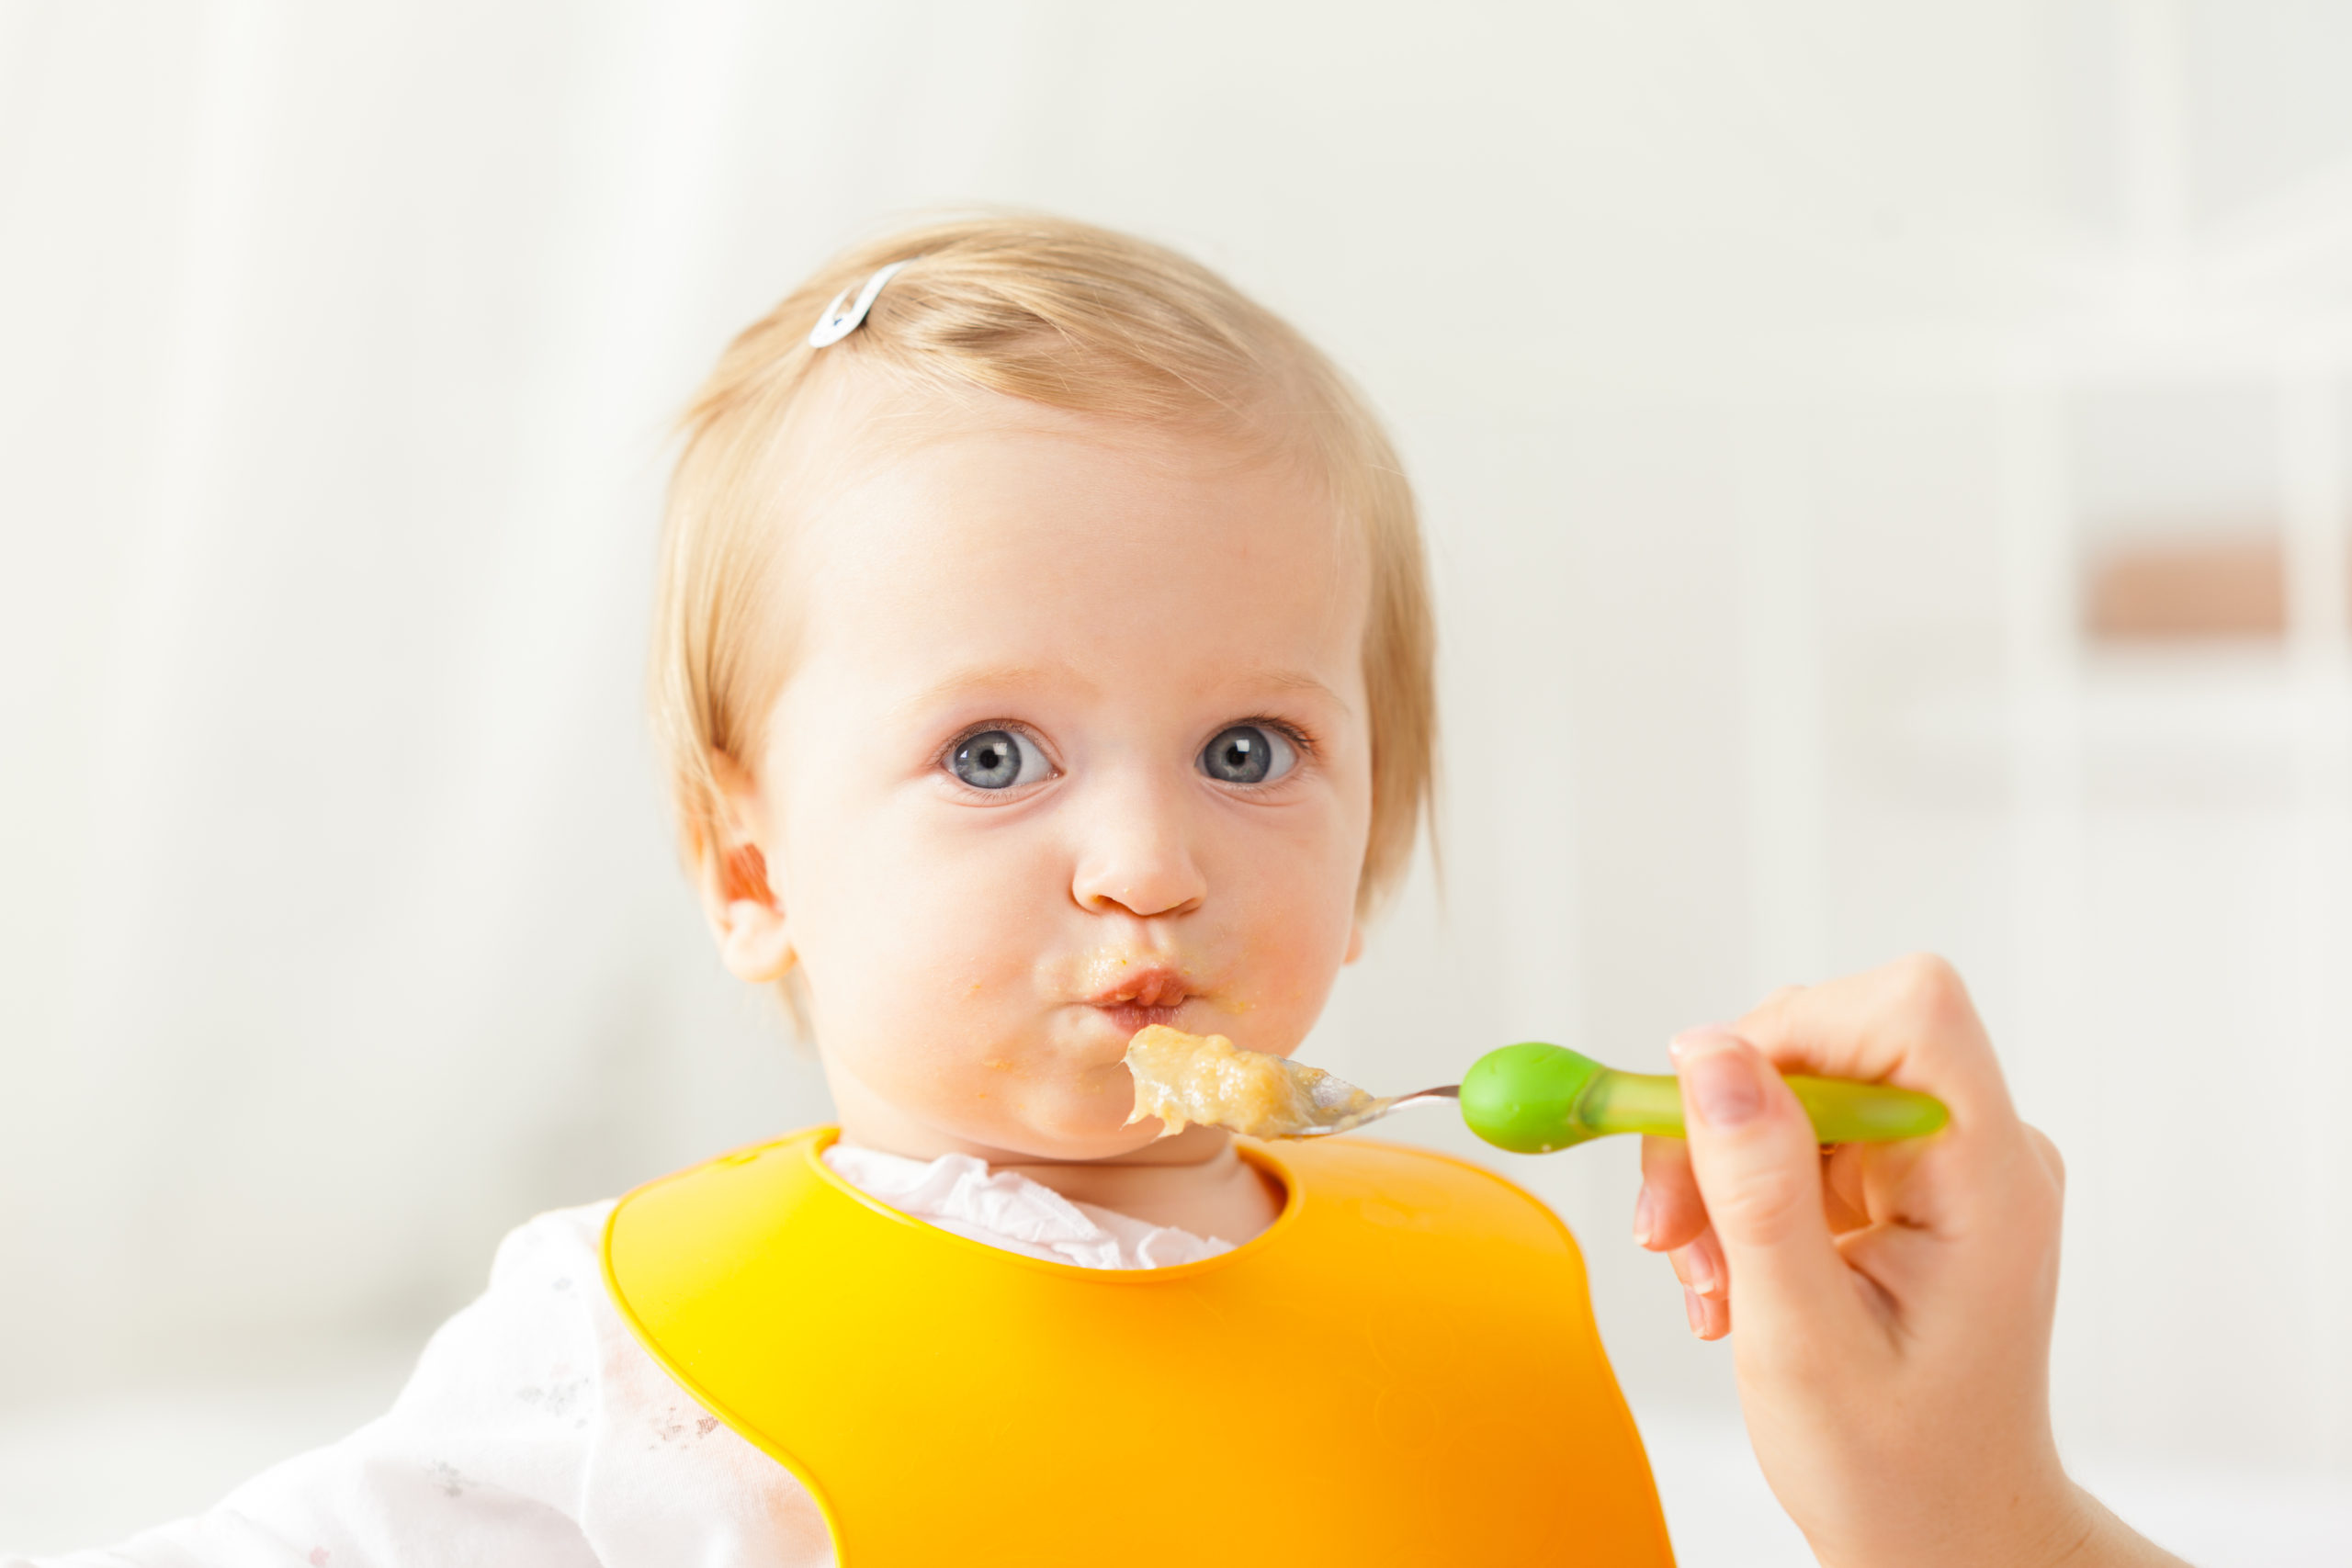 Little,Baby,Feeding,With,A,Spoon